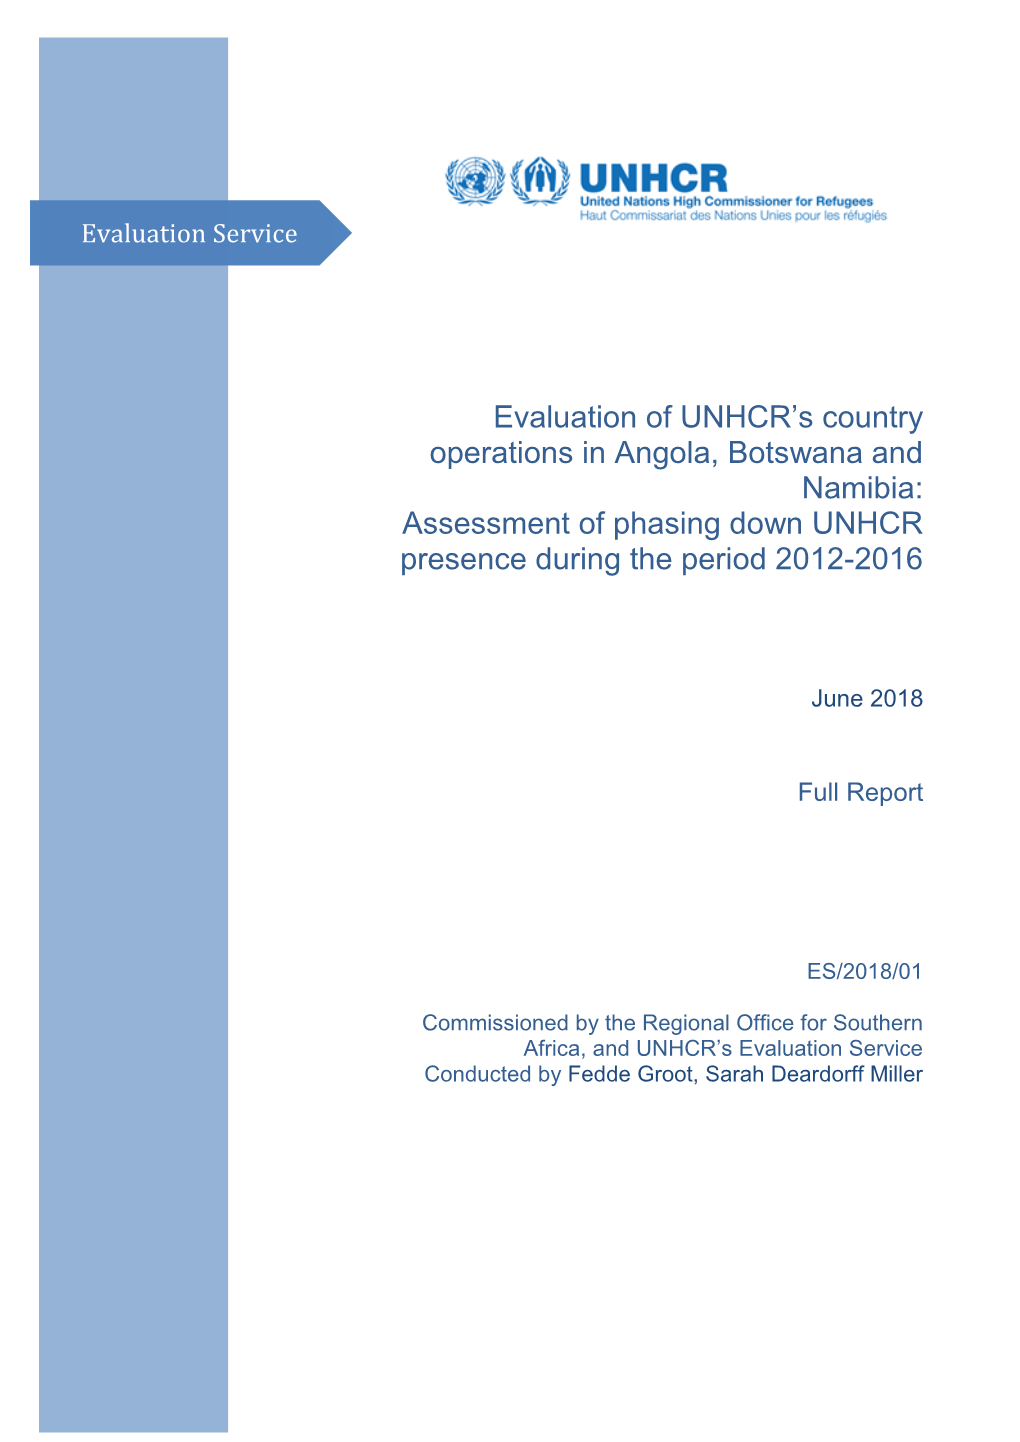 Evaluation of UNHCR's Country Operations in Angola, Botswana